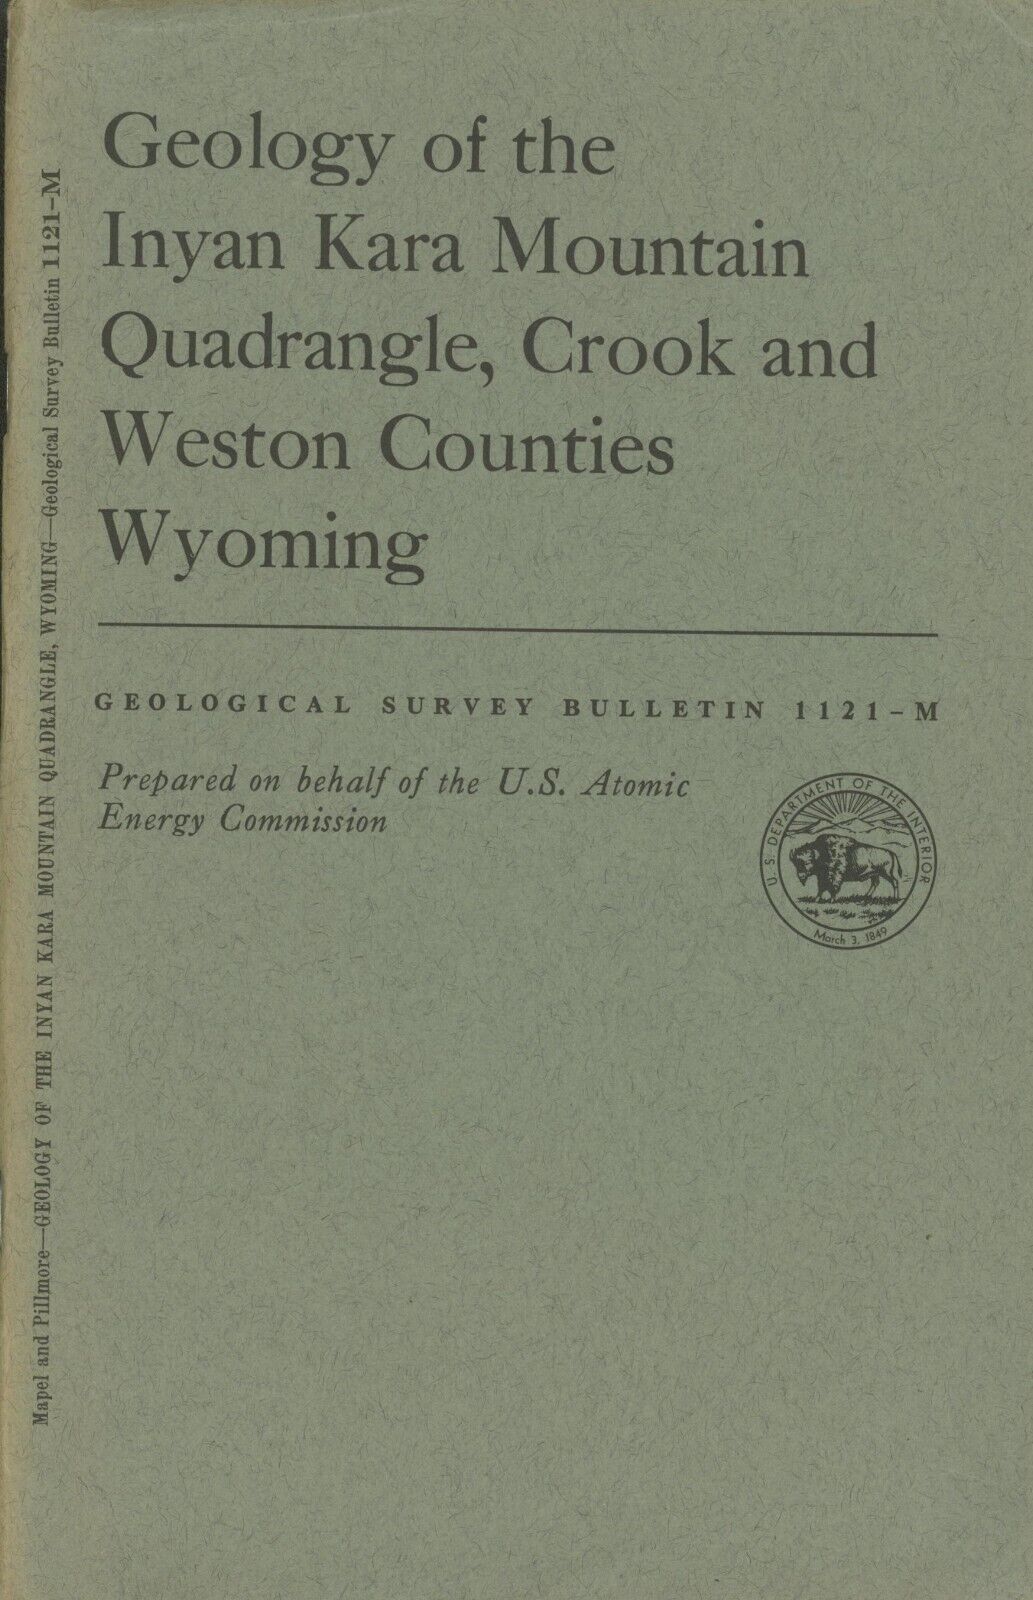 Primary image for Geology of Inyan Kara Mountain Quadrangle, Crook and Weston Counties, Wyoming